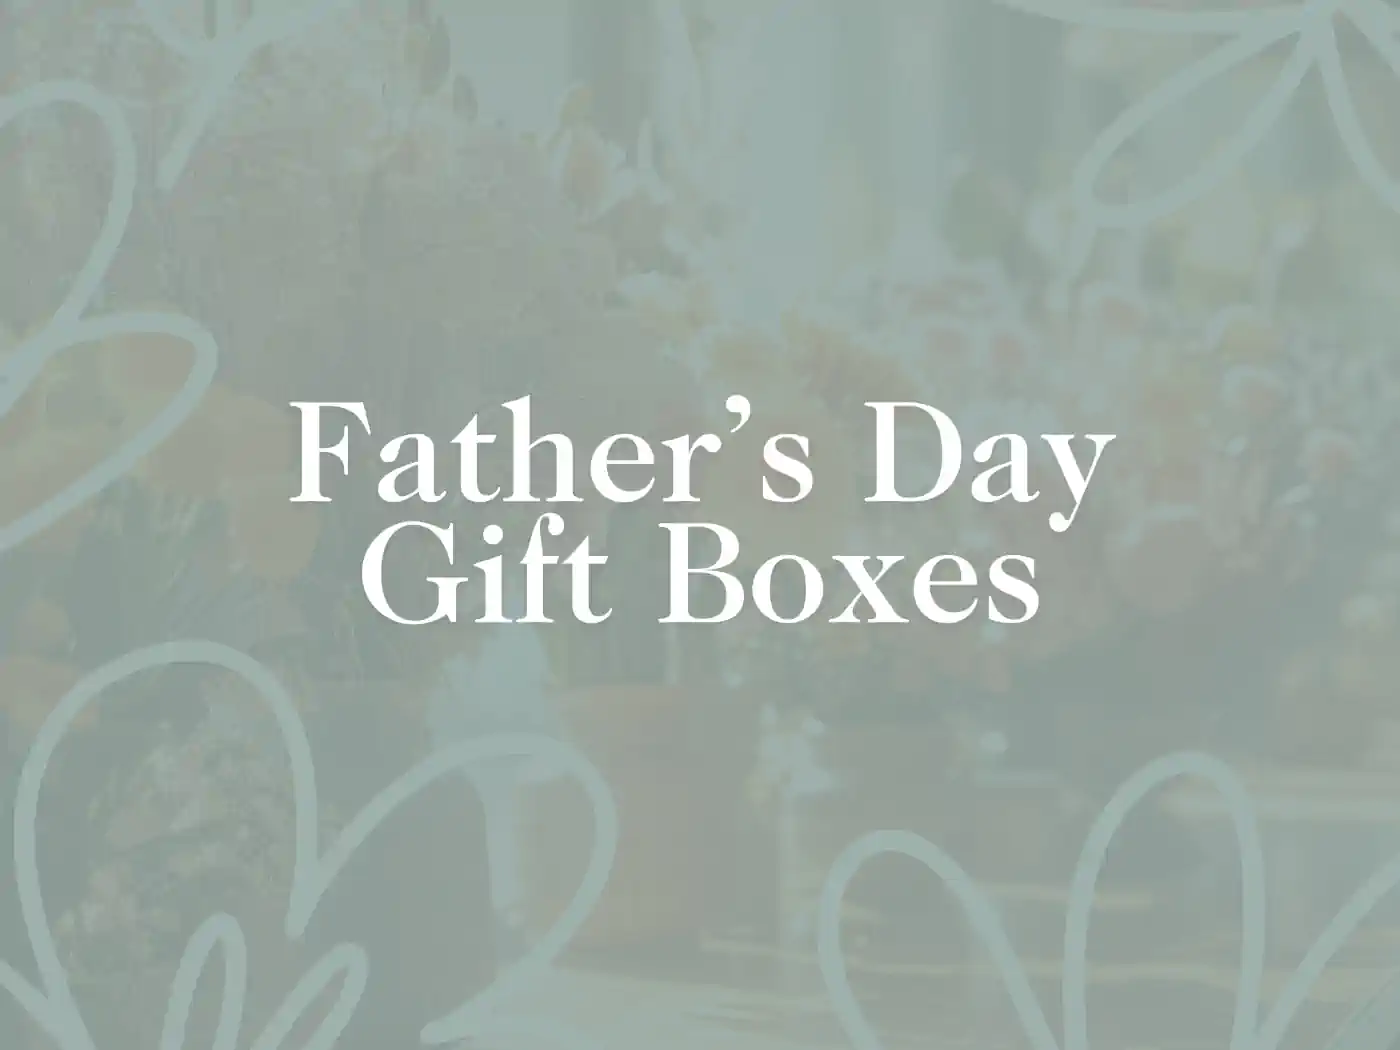 Father’s Day Gift Boxes text over a floral background. Fabulous Flowers and Gifts. Fathers Day Gift Boxes. Delivered with Heart.